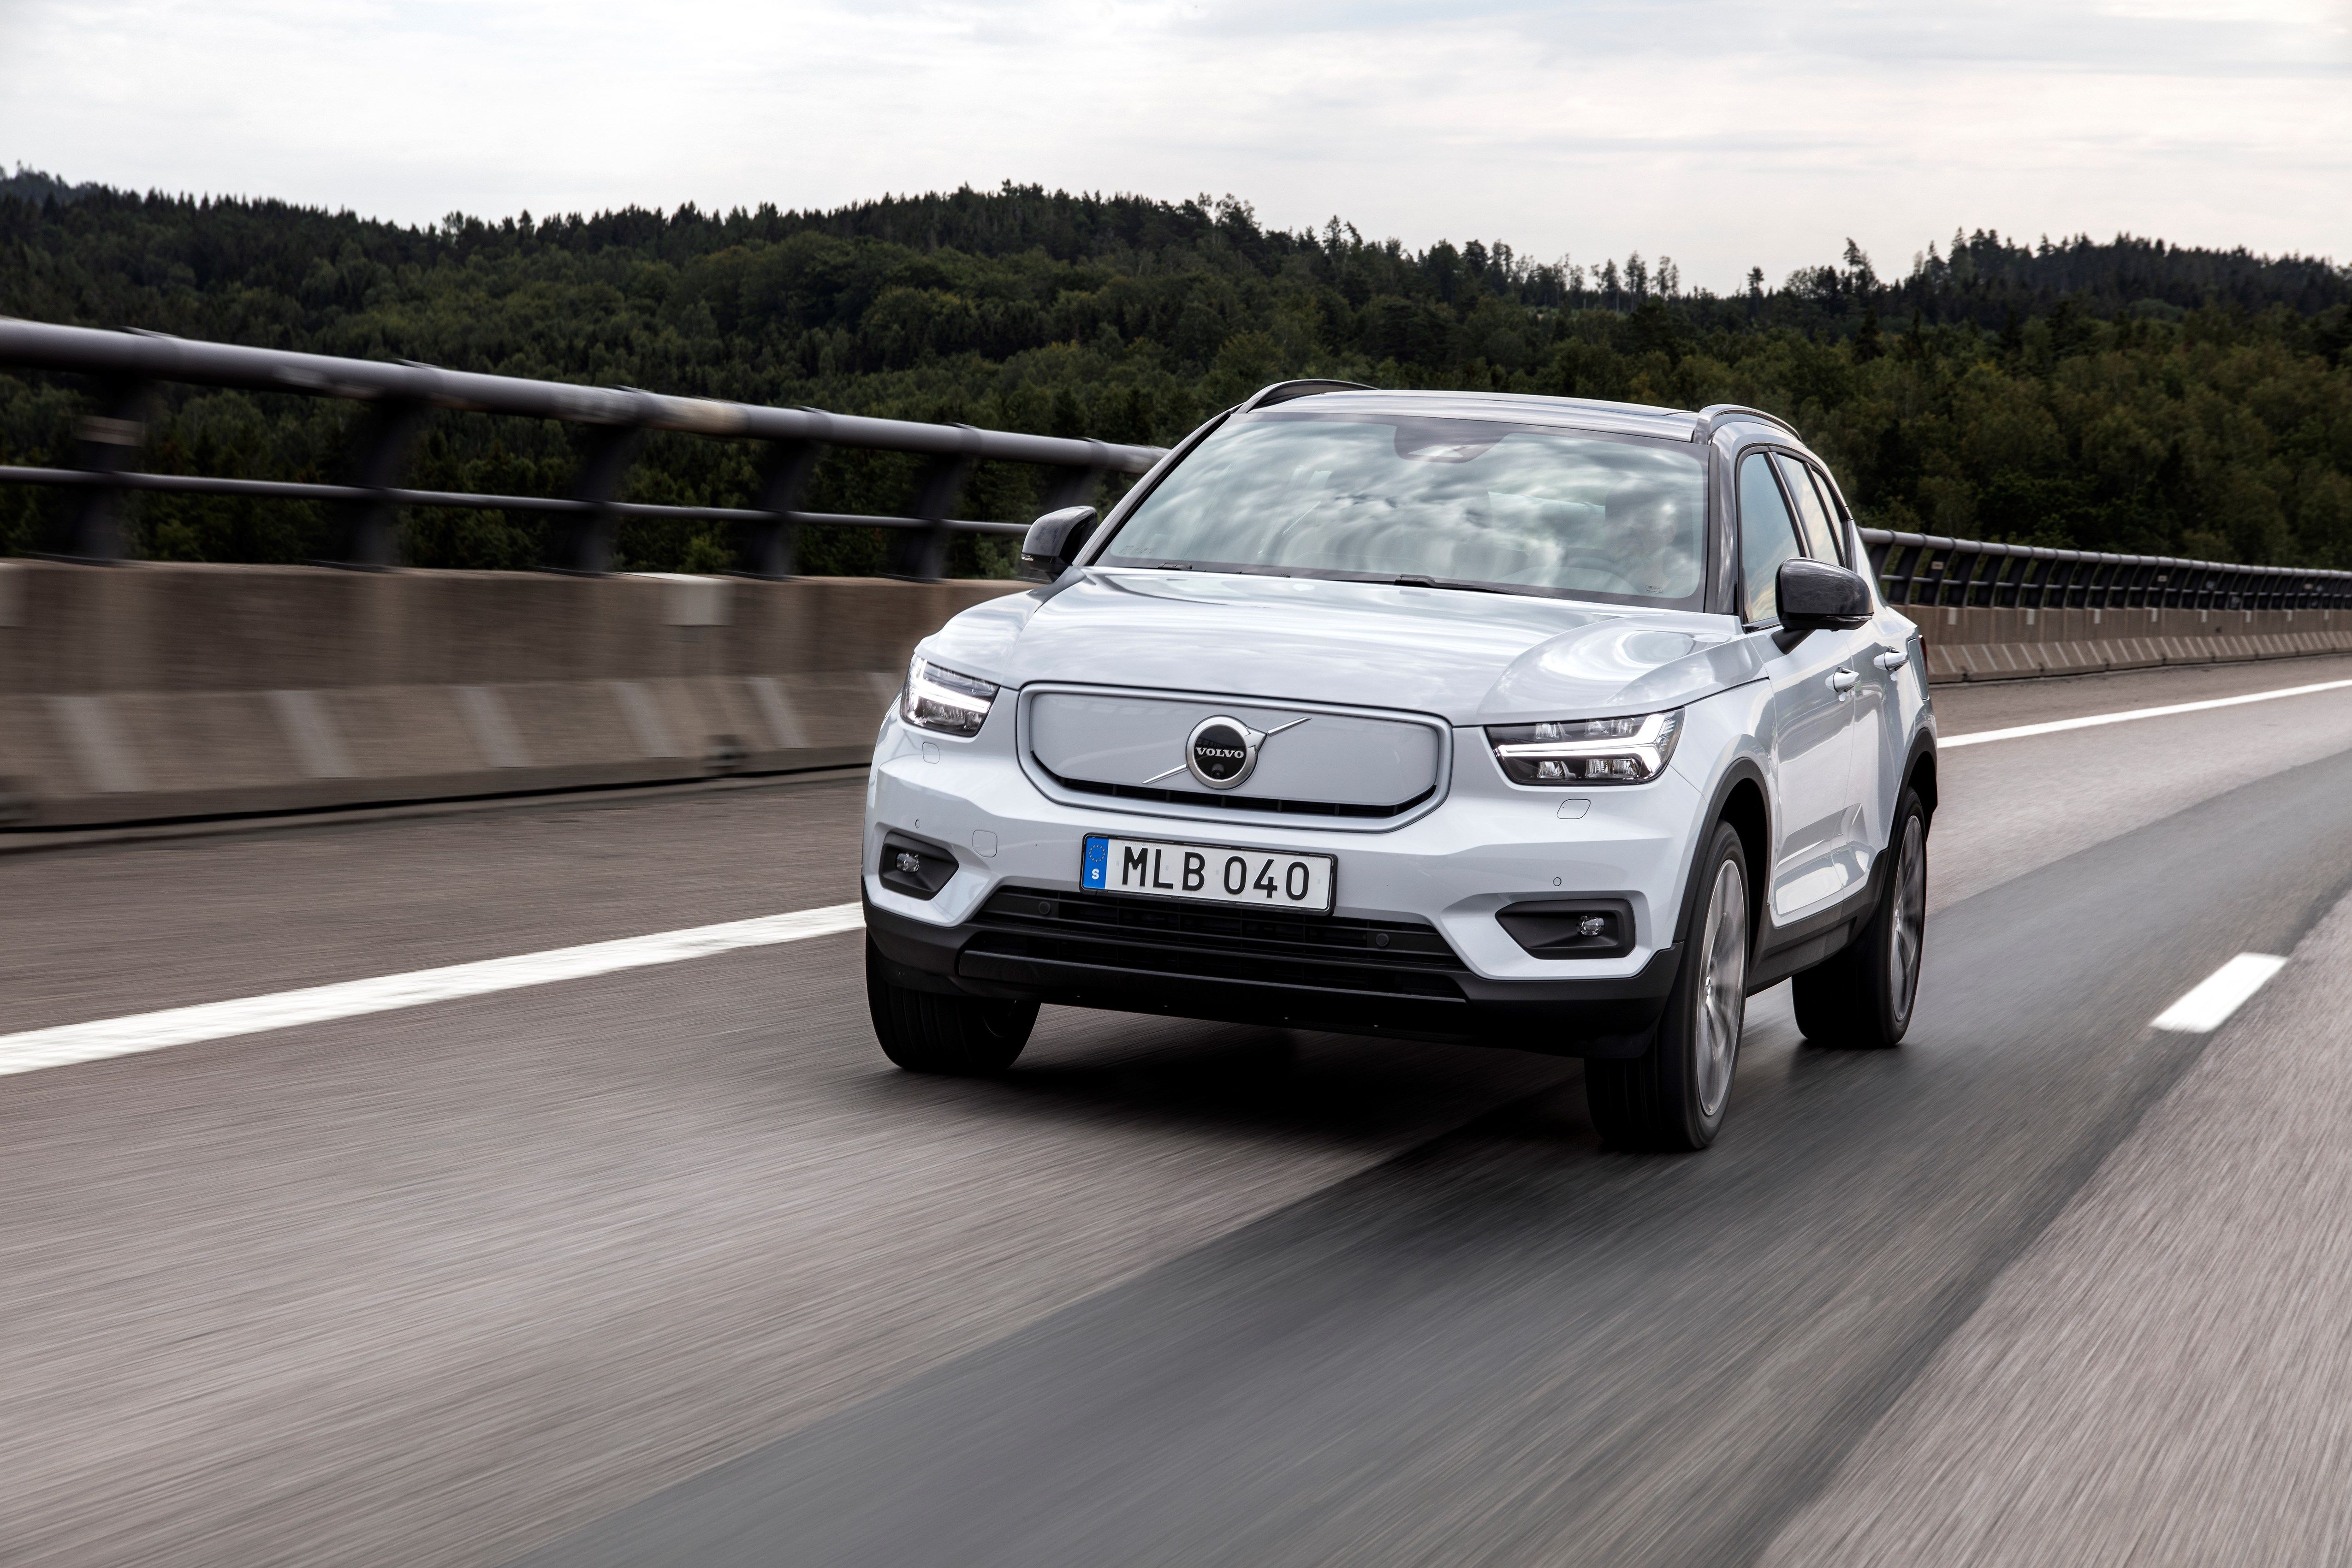 The Pure Electric XC40 P8 Recharge First Edition Volvo Cars Poole